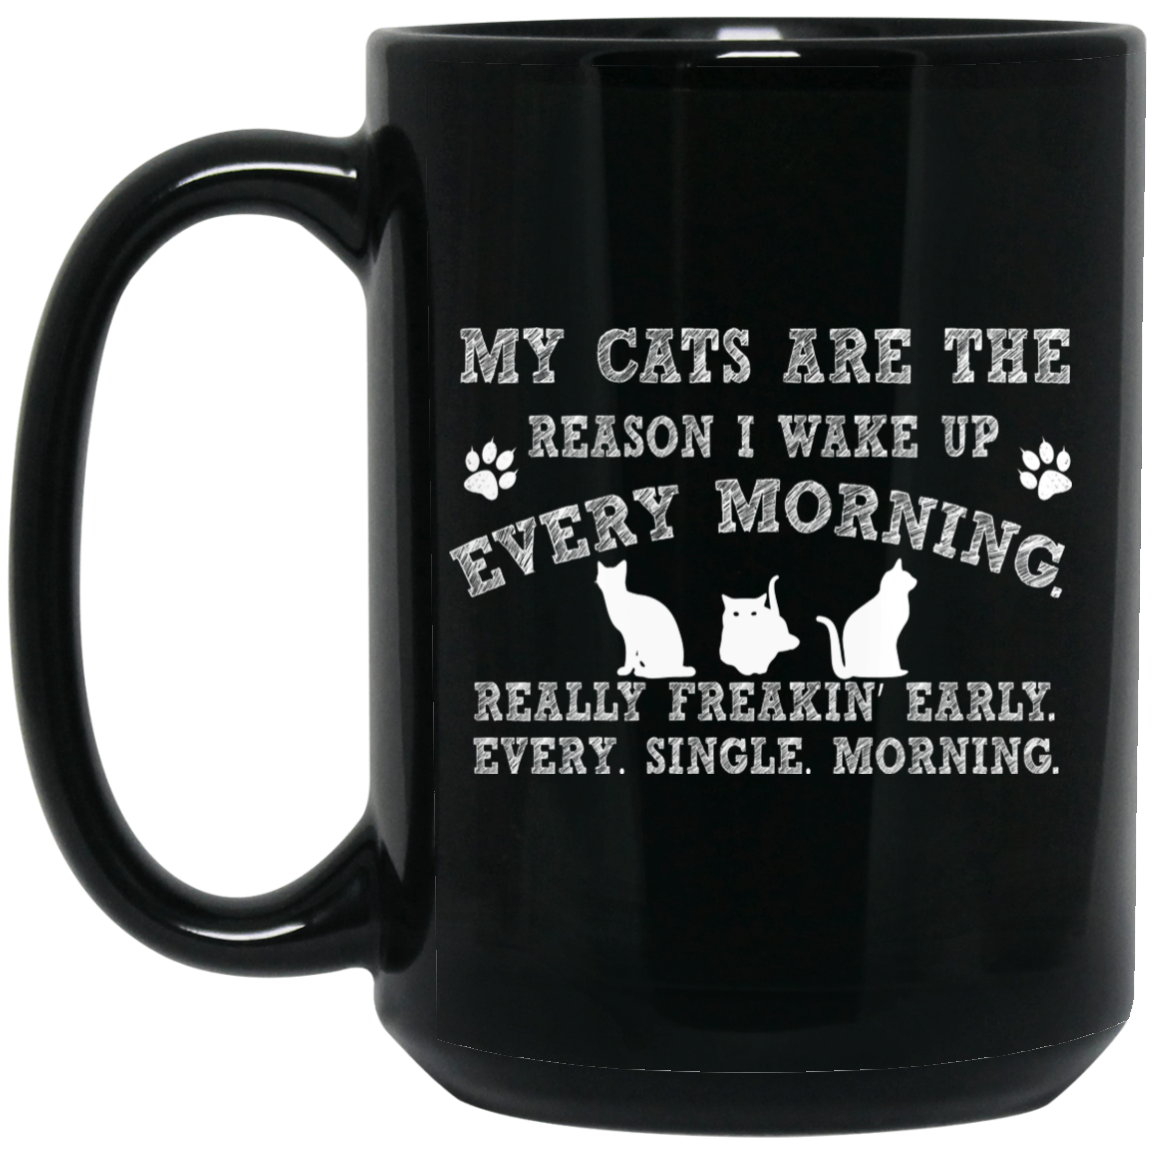 My Cats are the Reason - Black Mugs